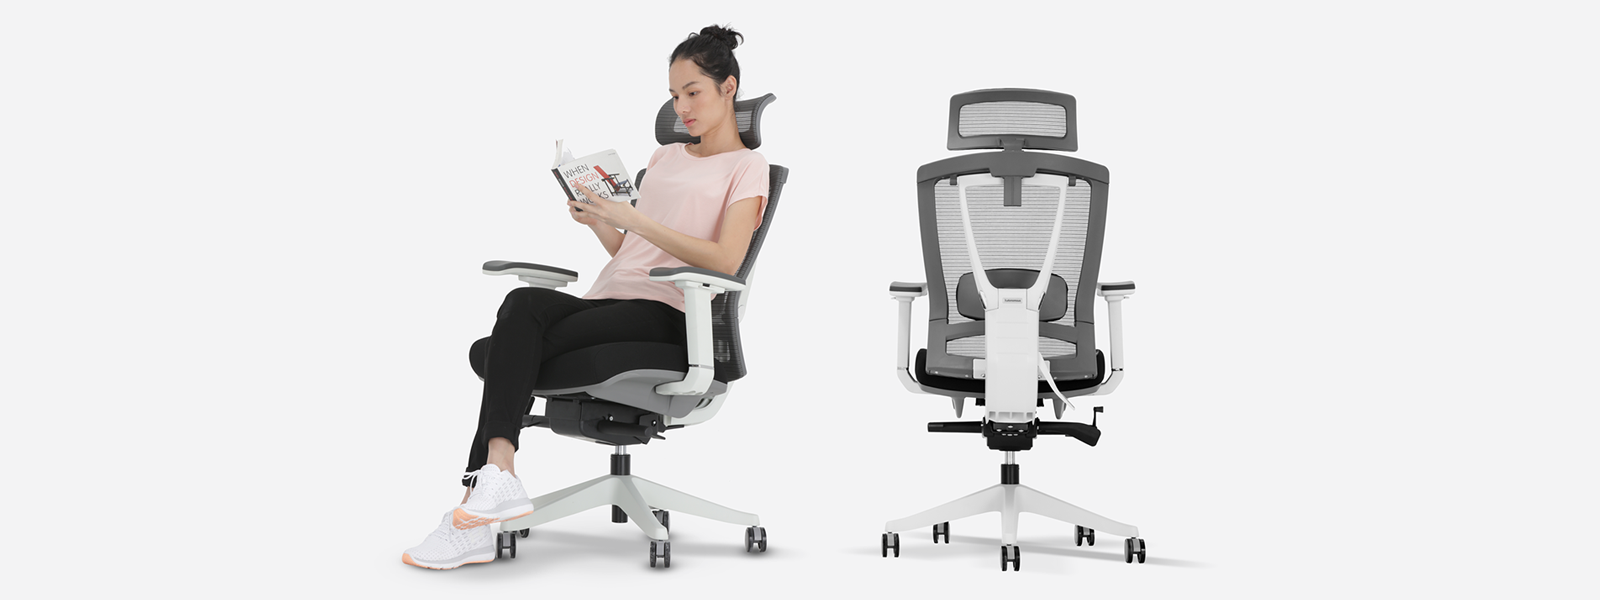 Why the ErgoChair Pro is Considered One of the Best Ergonomic Office Chairs